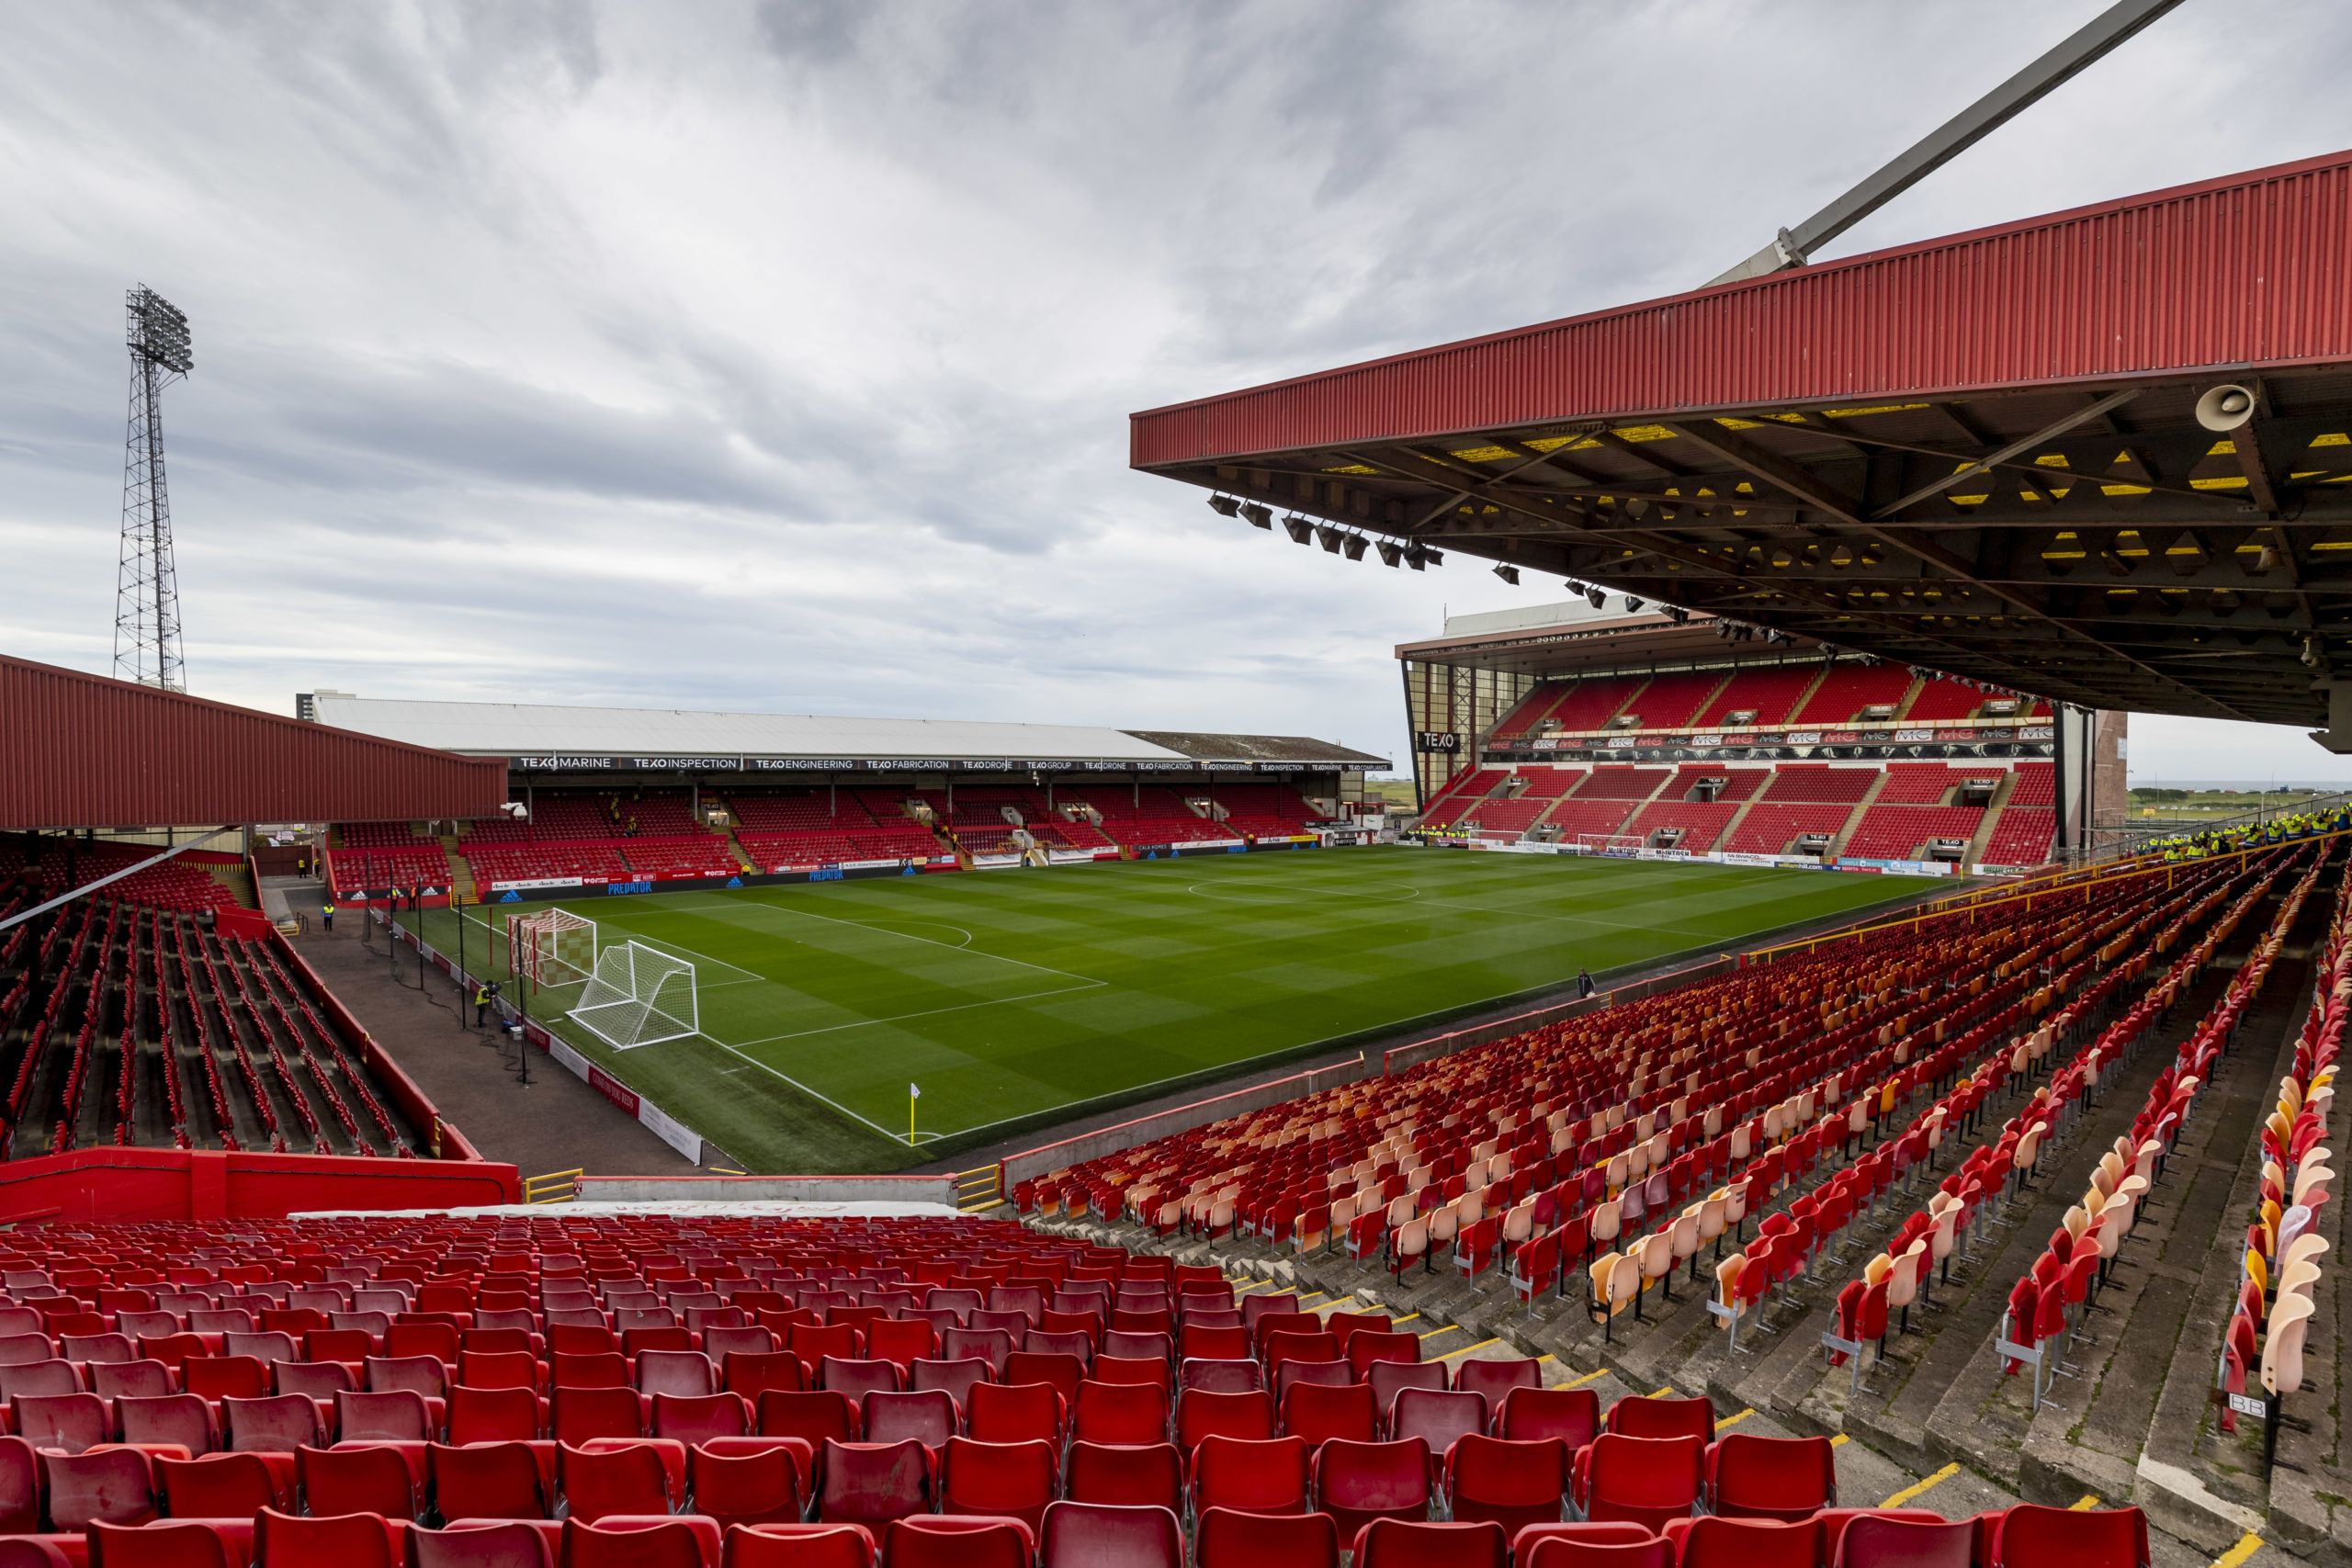 Aberdeen were due to play Hamilton Accies at Pittodrie on Wednesday.